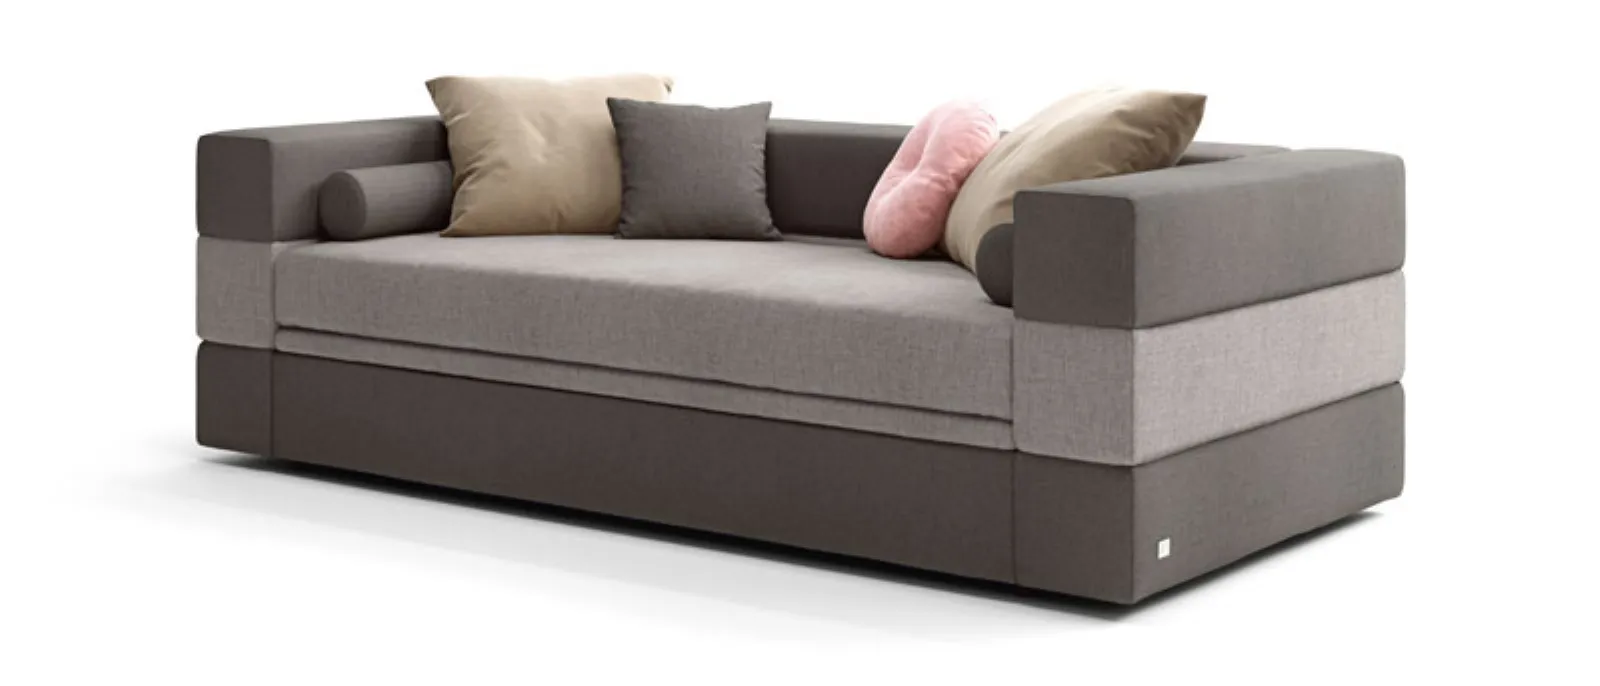 sofa bed with removable cover